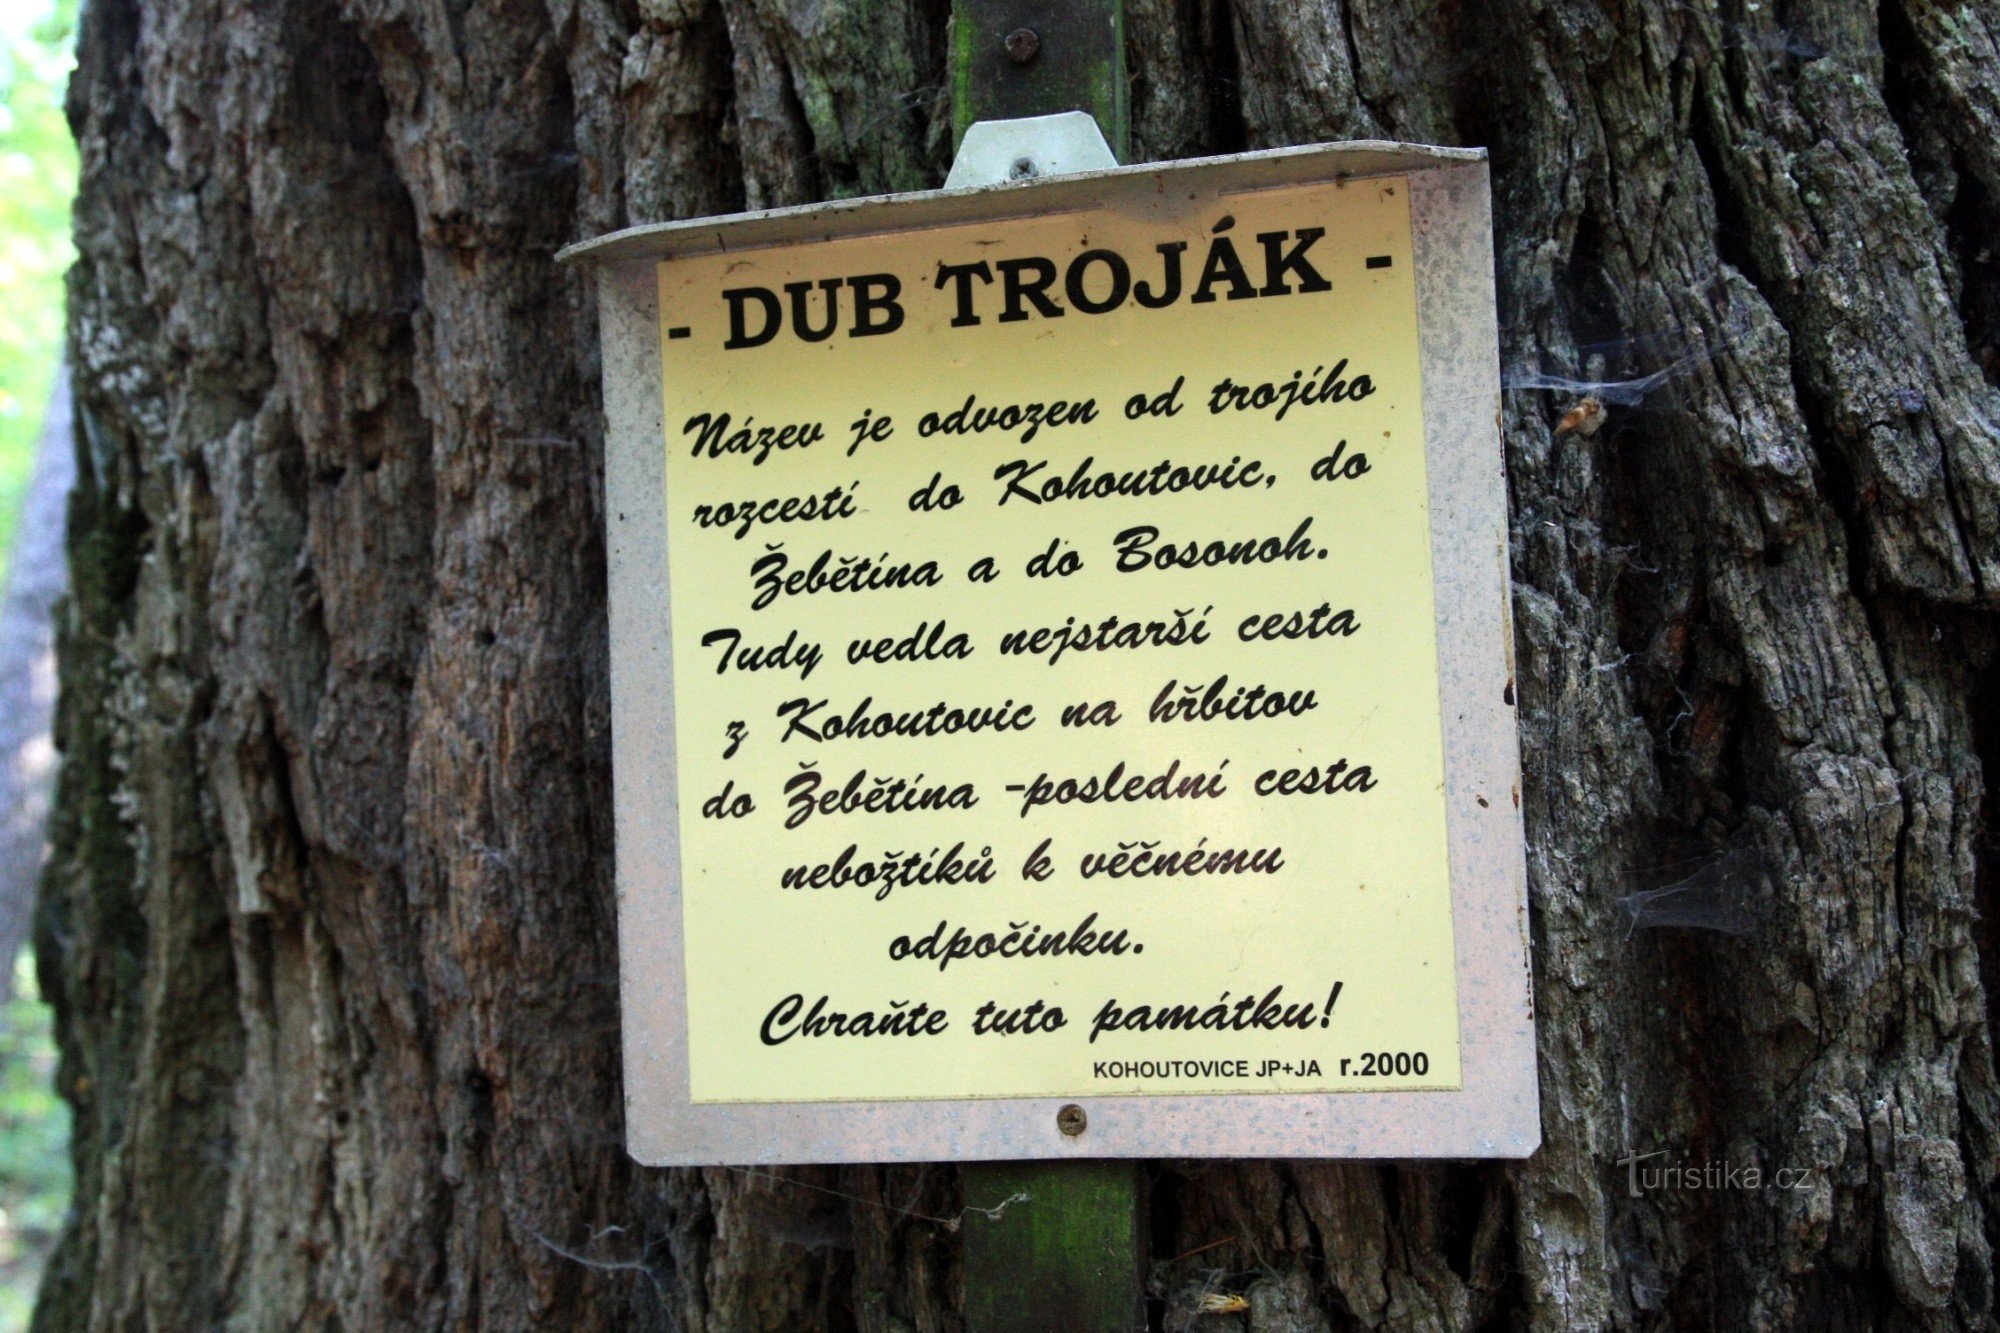 Information table on the tree